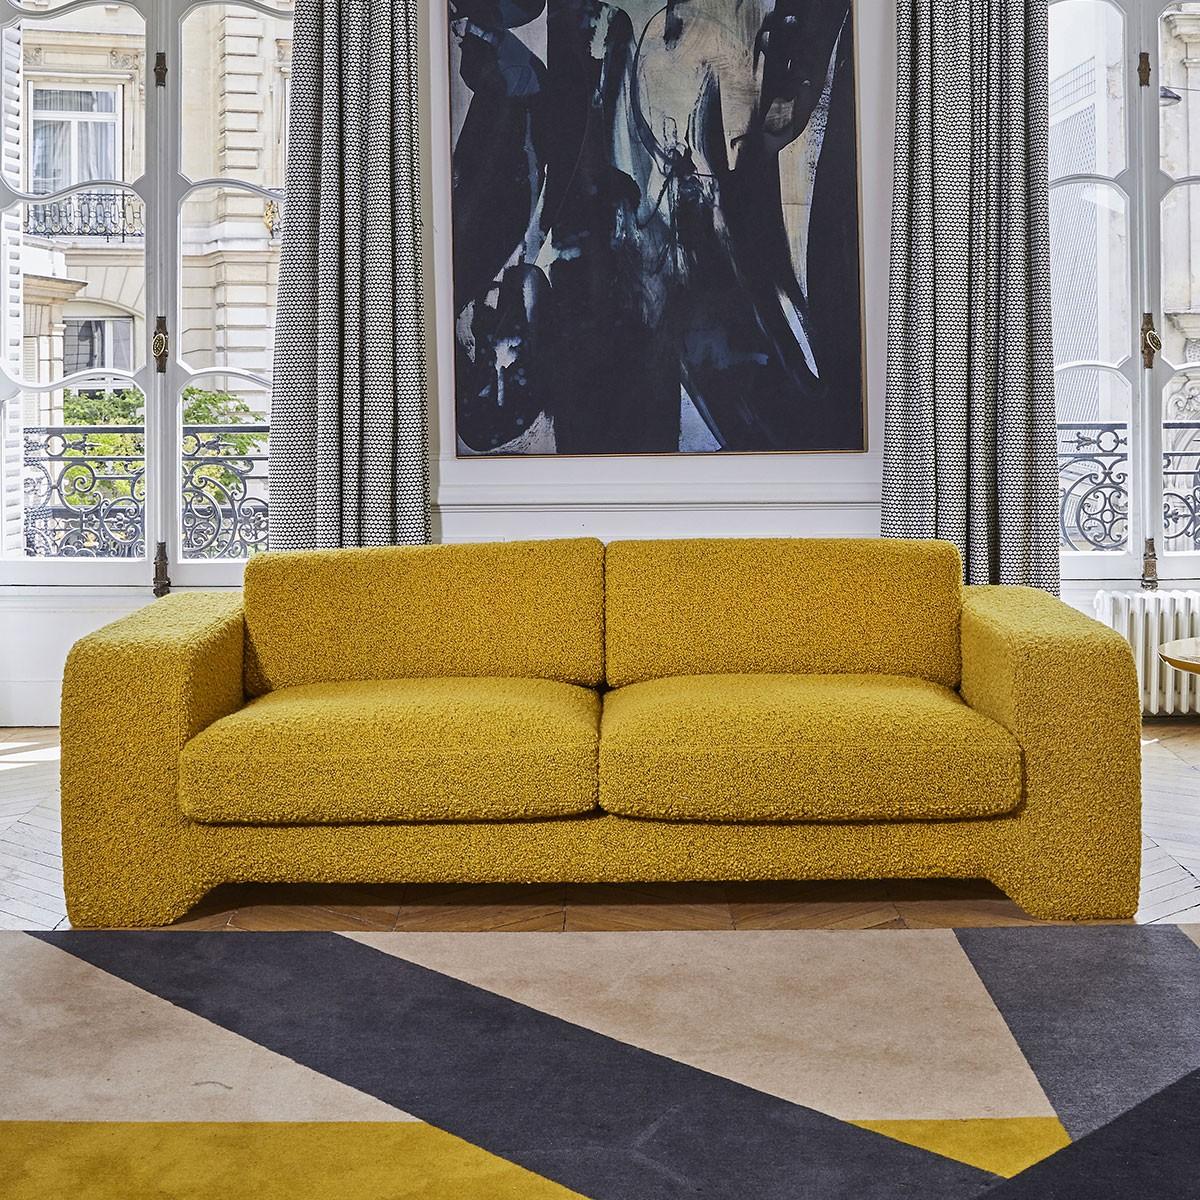 Popus Editions Giovanna 2.5 seater sofa in green Verone velvet upholstery

Giovanna is a sofa with a strong profile. A sober, plush line, with this famous detail that changes everything, so as not to forget its strength of character and this